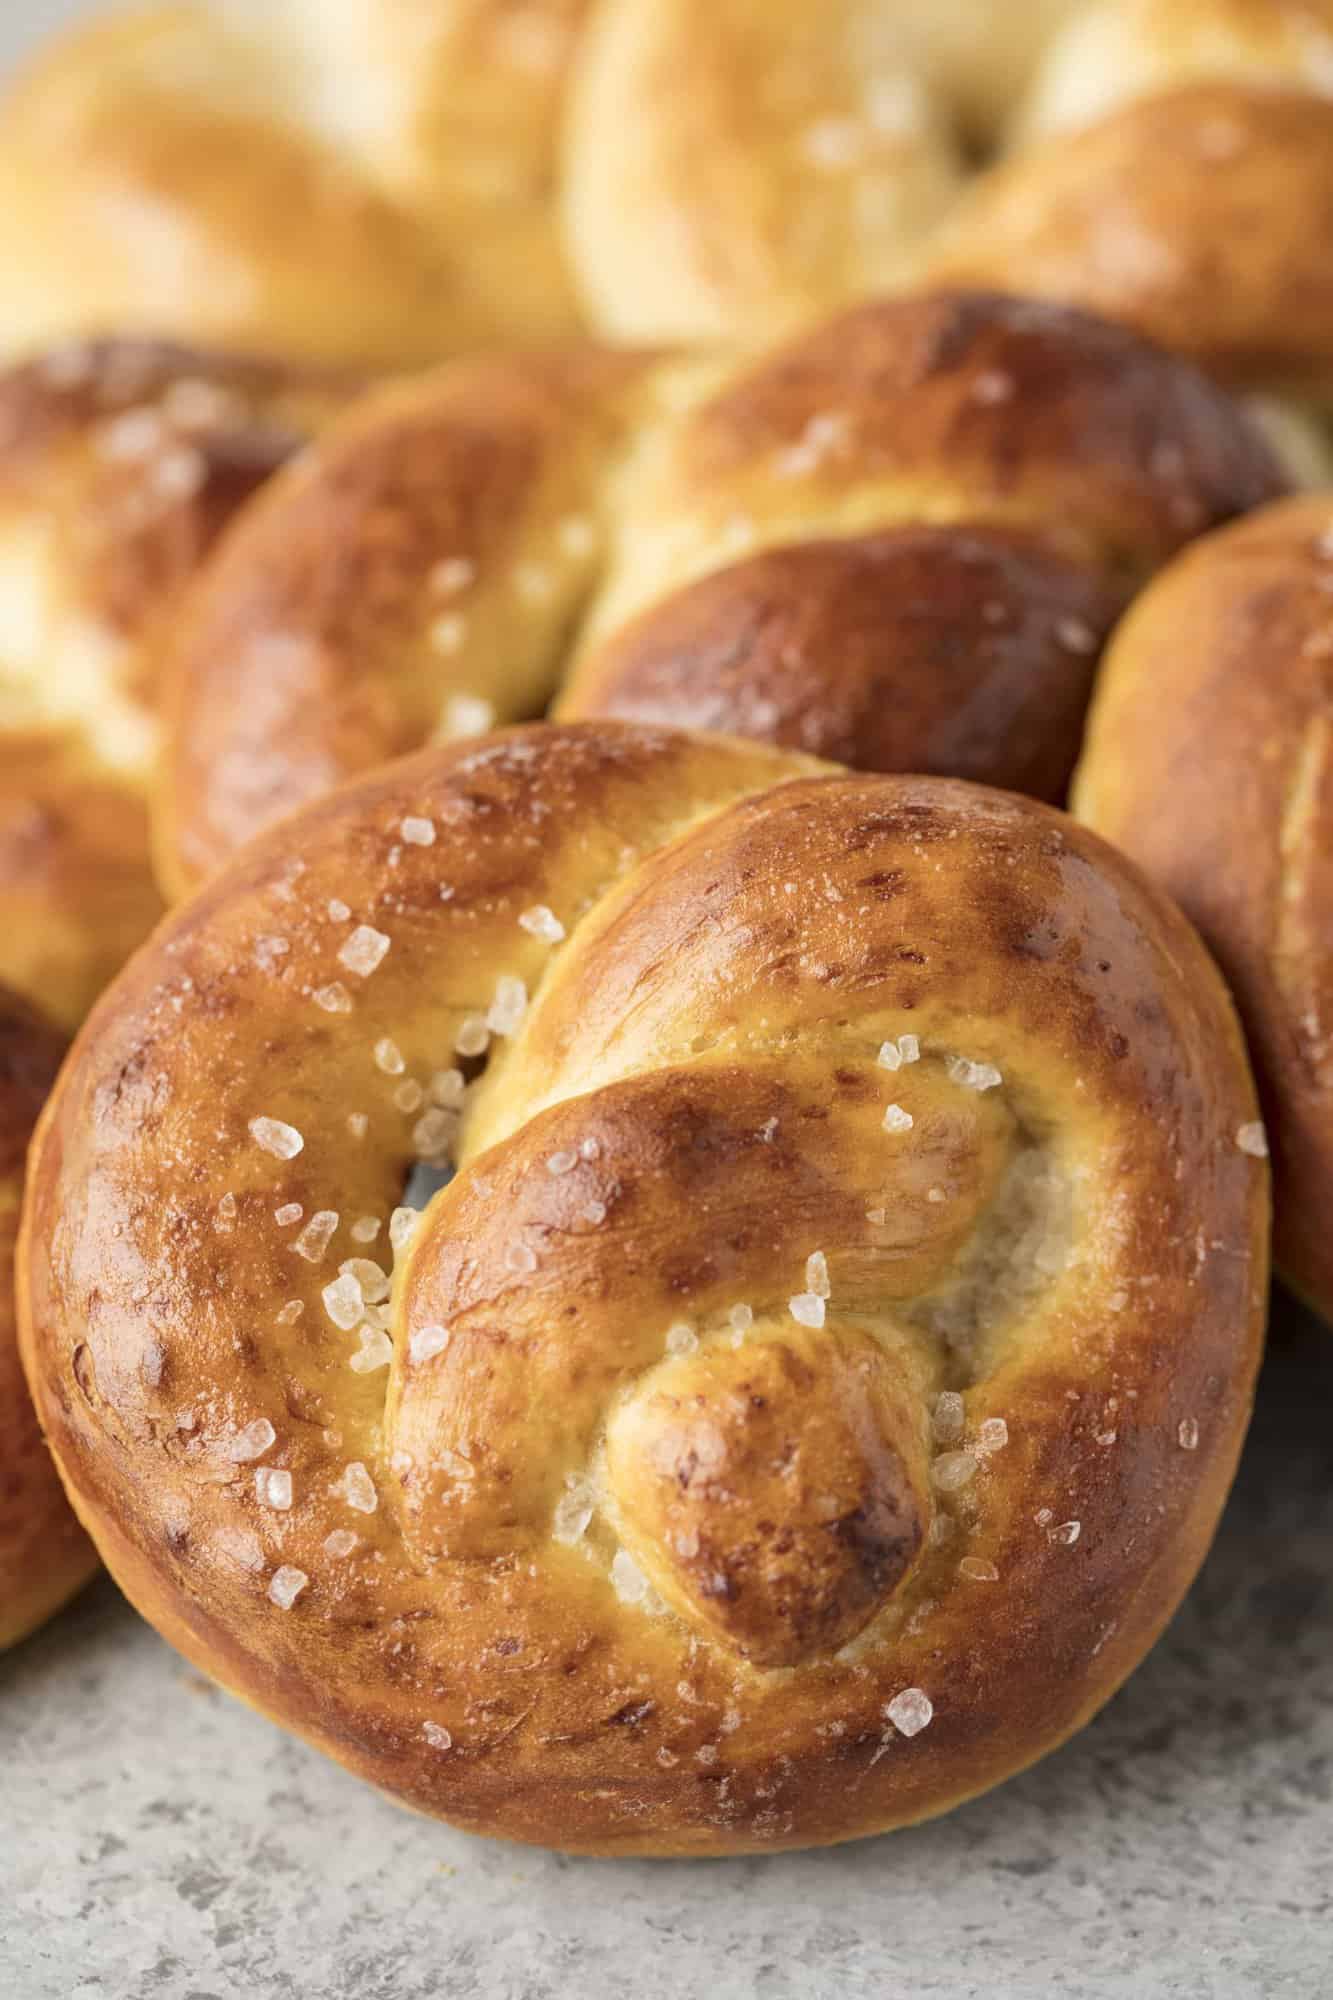 Learn how to make The Best Homemade Soft Pretzels complete with a visual demonstration. Just a few simple ingredients is all you need and it's so easy the kids can get in on the action too!